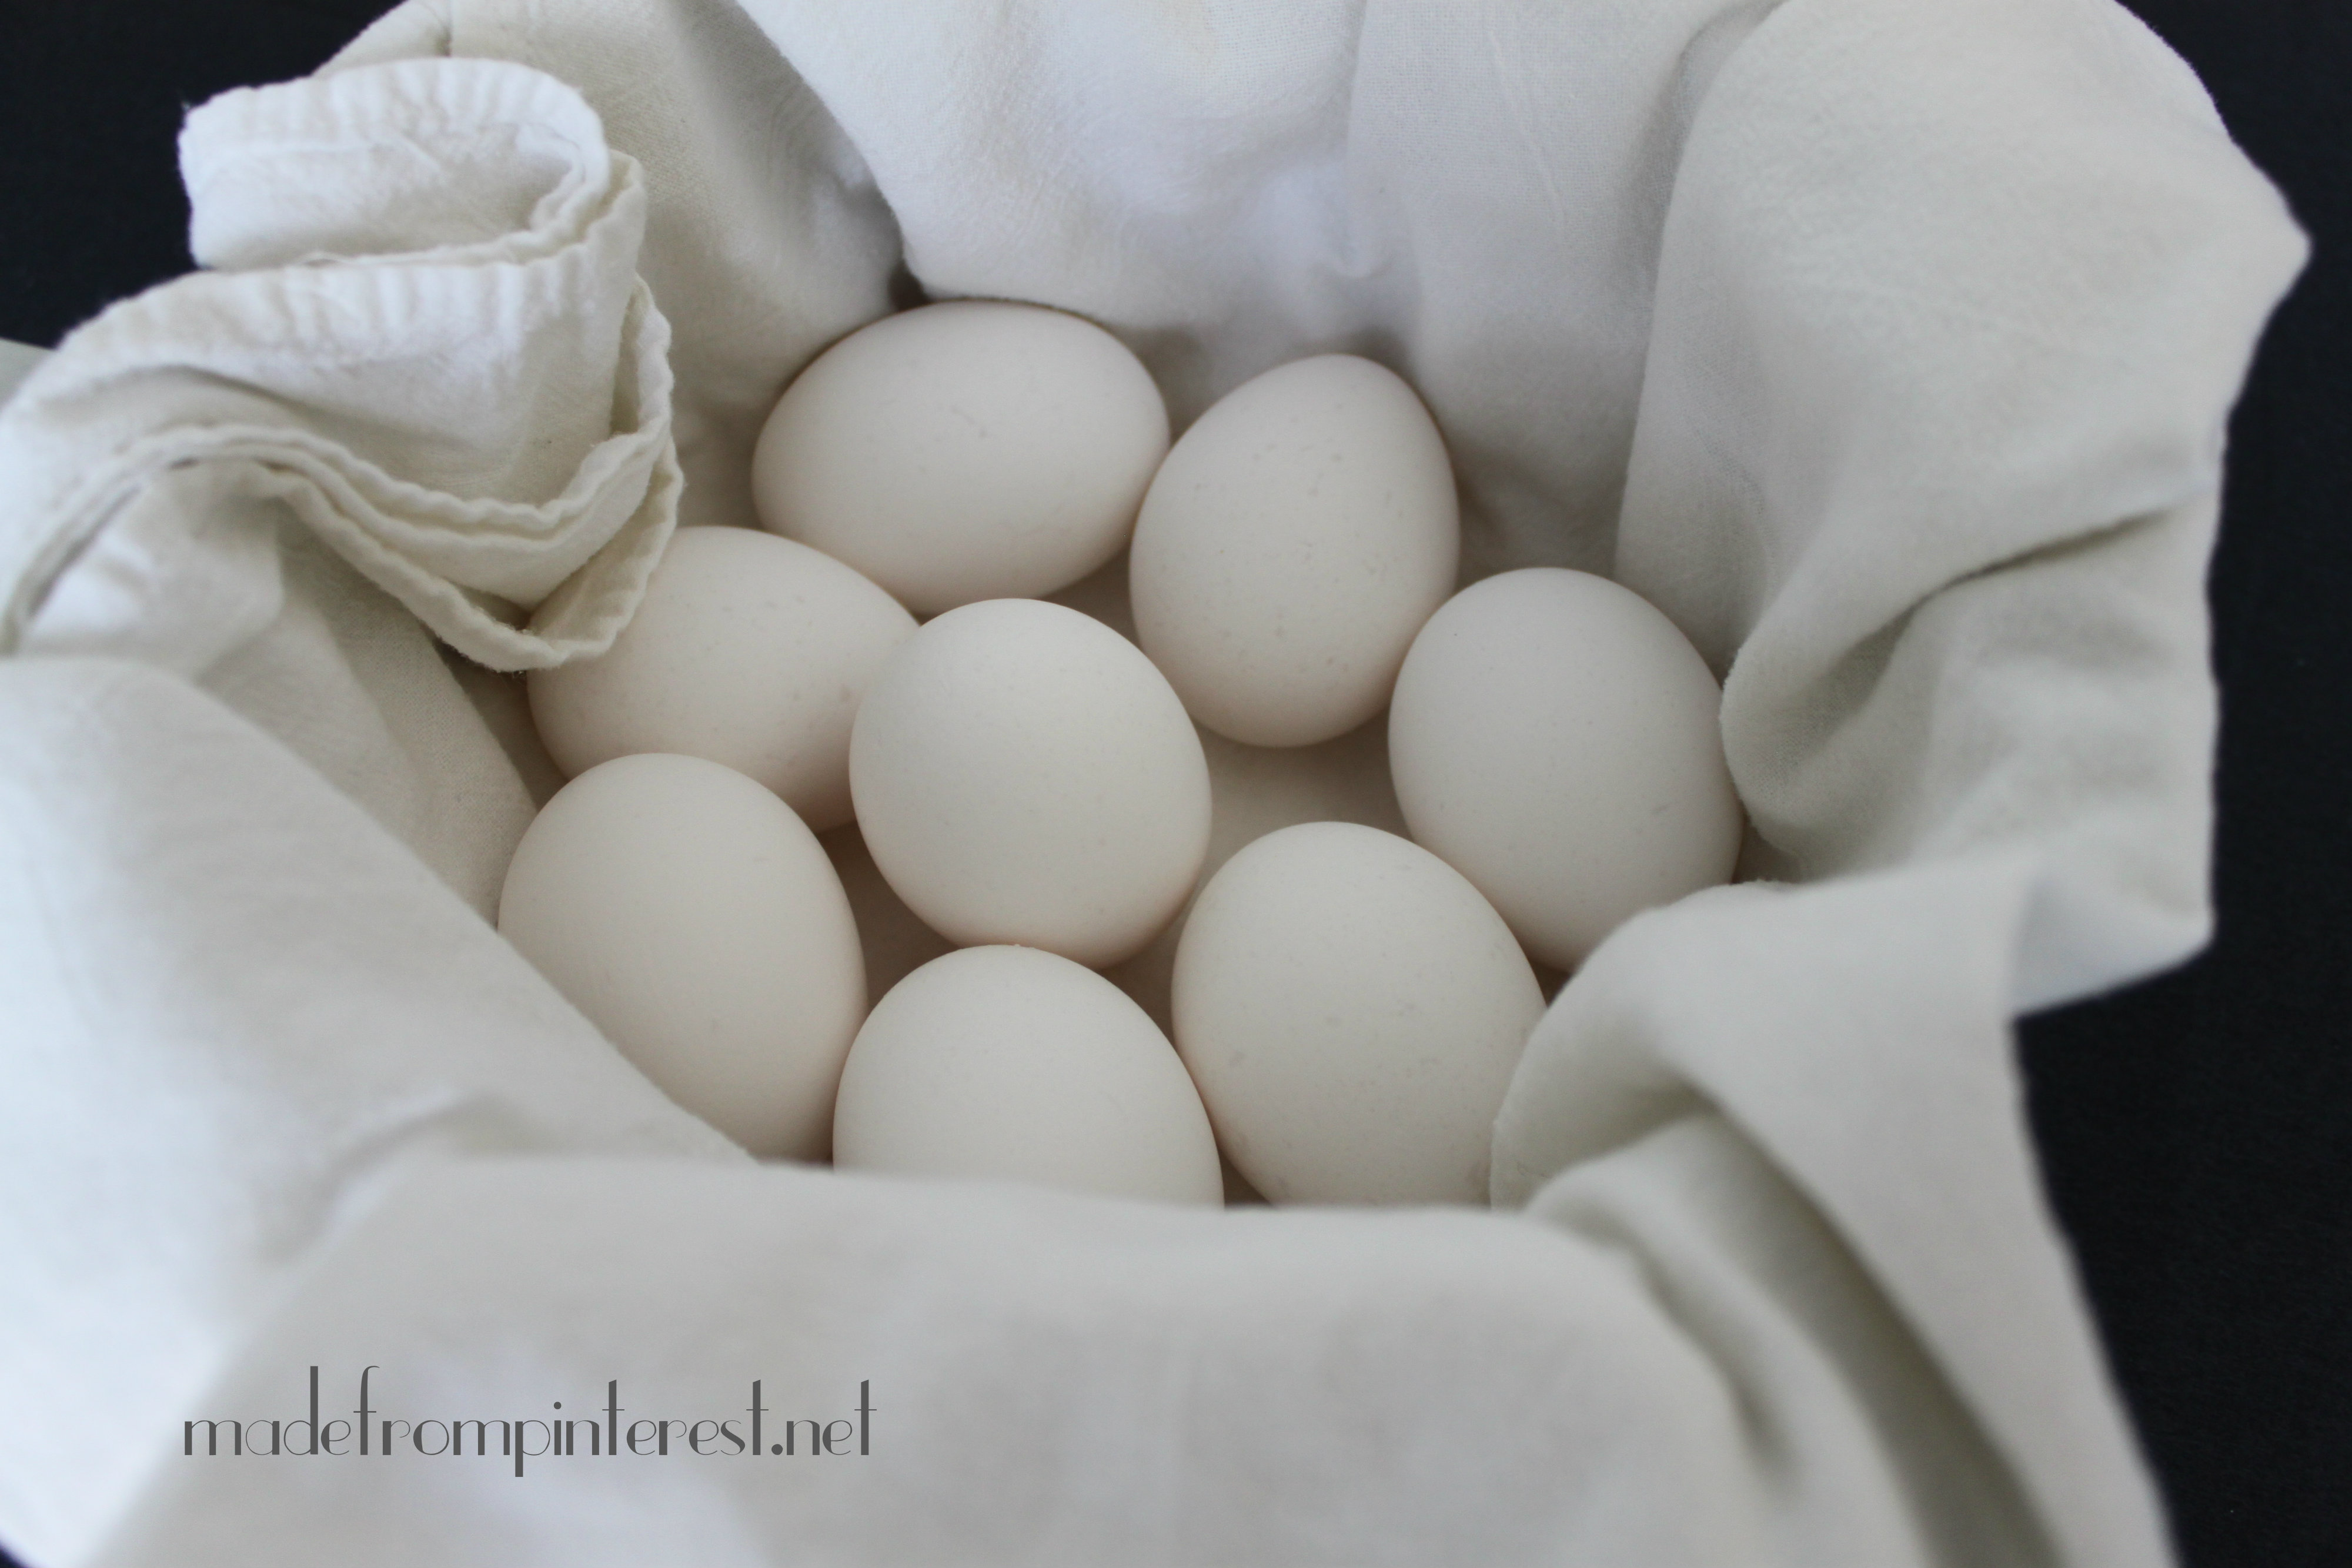 Place a clean white cotton kitchen towel in pot to cushion eggs so they won't crack @madefrompinterest.net